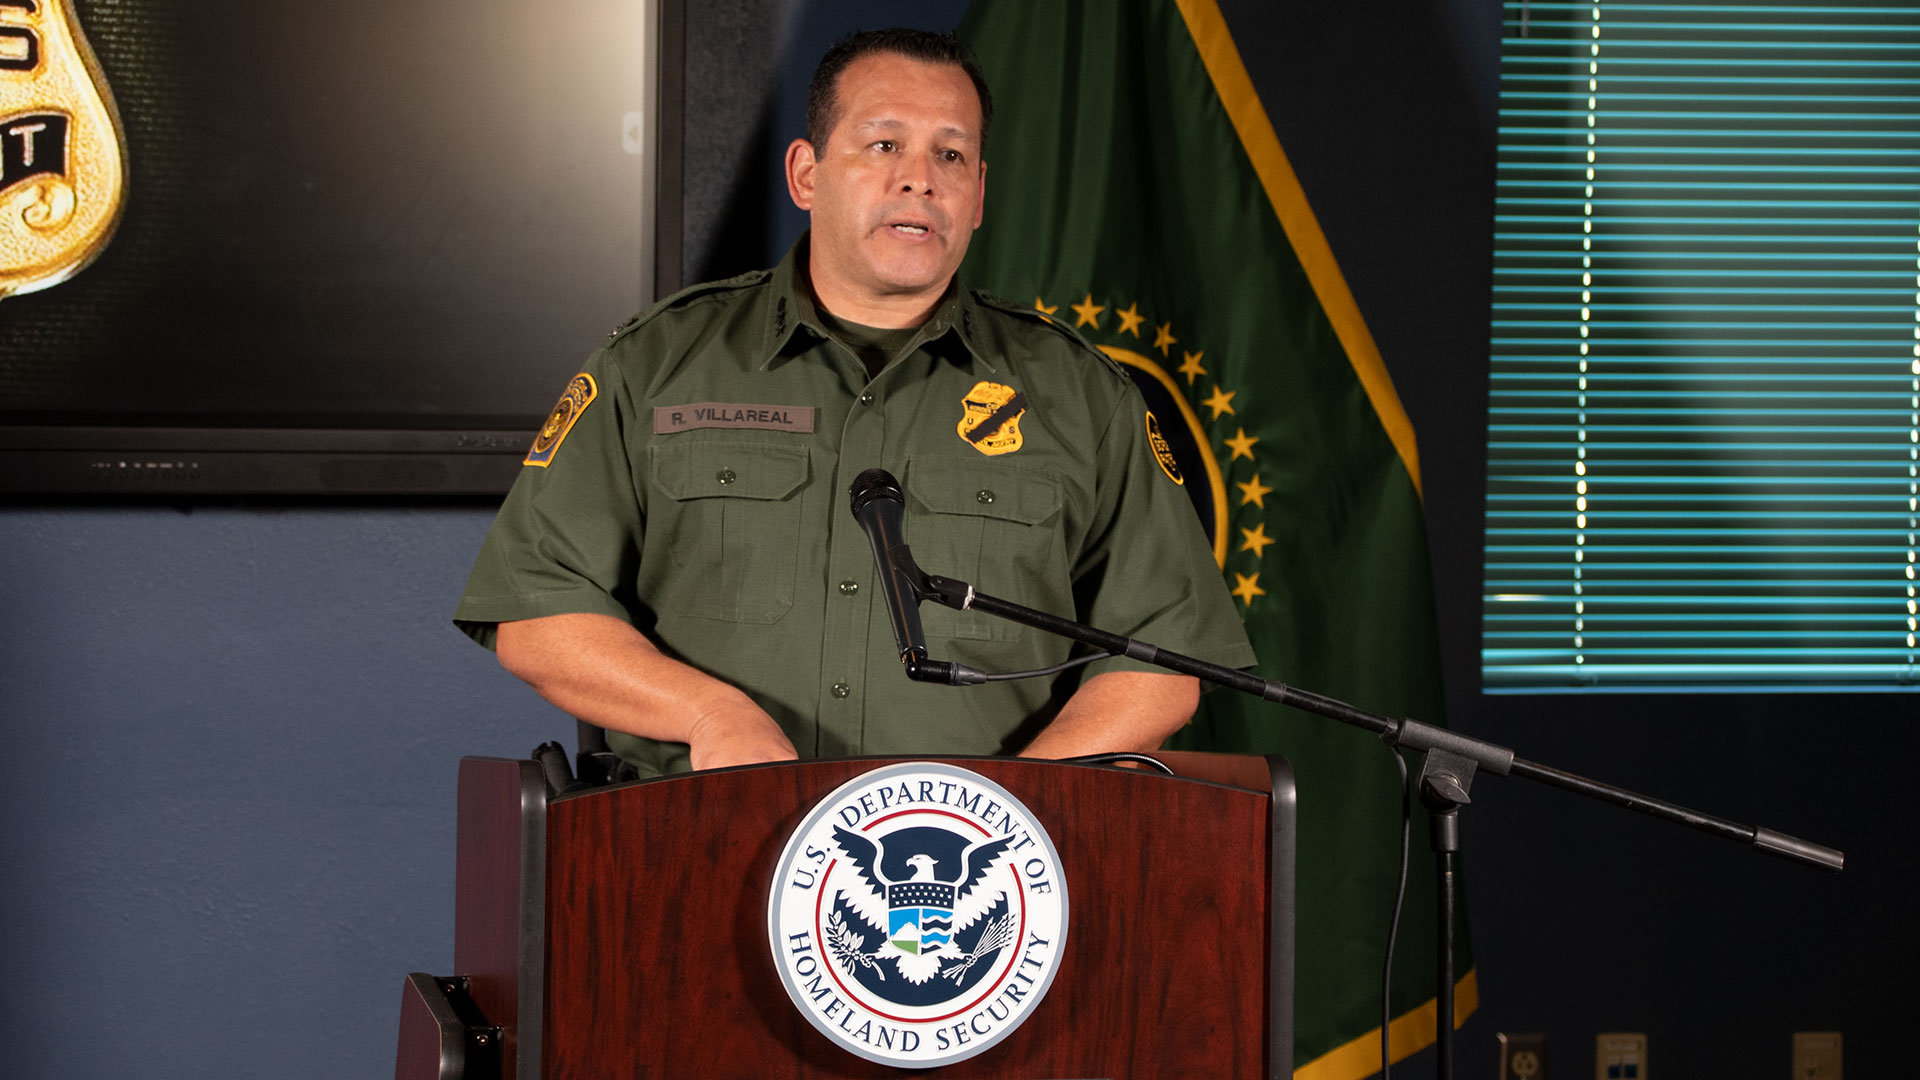 Tucson Sector Chief Roy Villareal speaks at an Oct. 7, 2019 news conference in Tucson about the death of agent Robert Hotten.